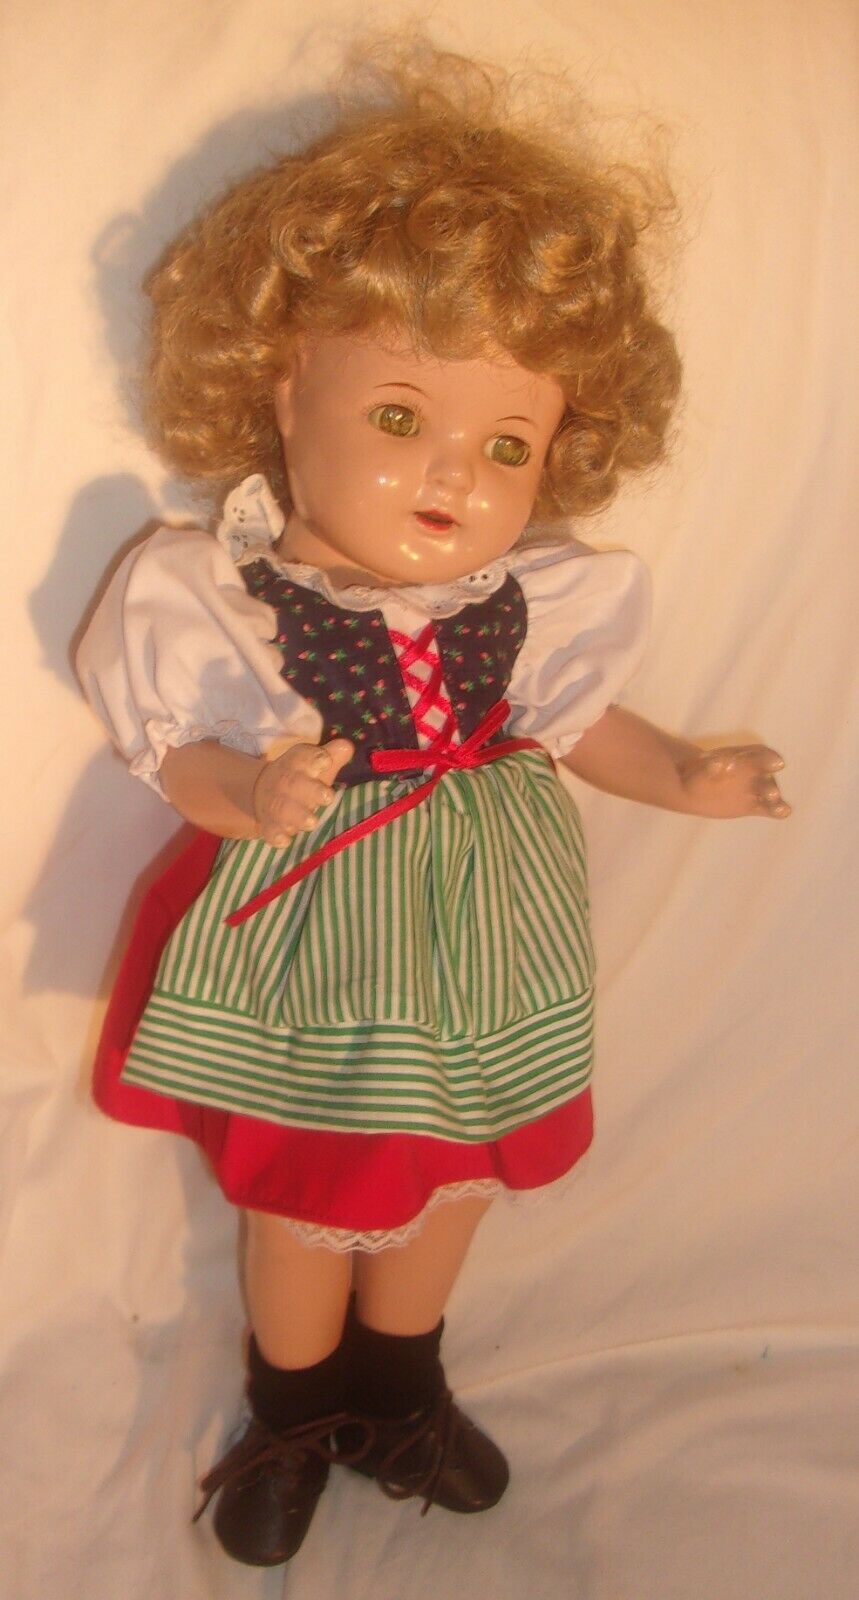 Vintage Nancy Shirley Temple Composition Doll 16 Inches Tall With Sleep Eyes